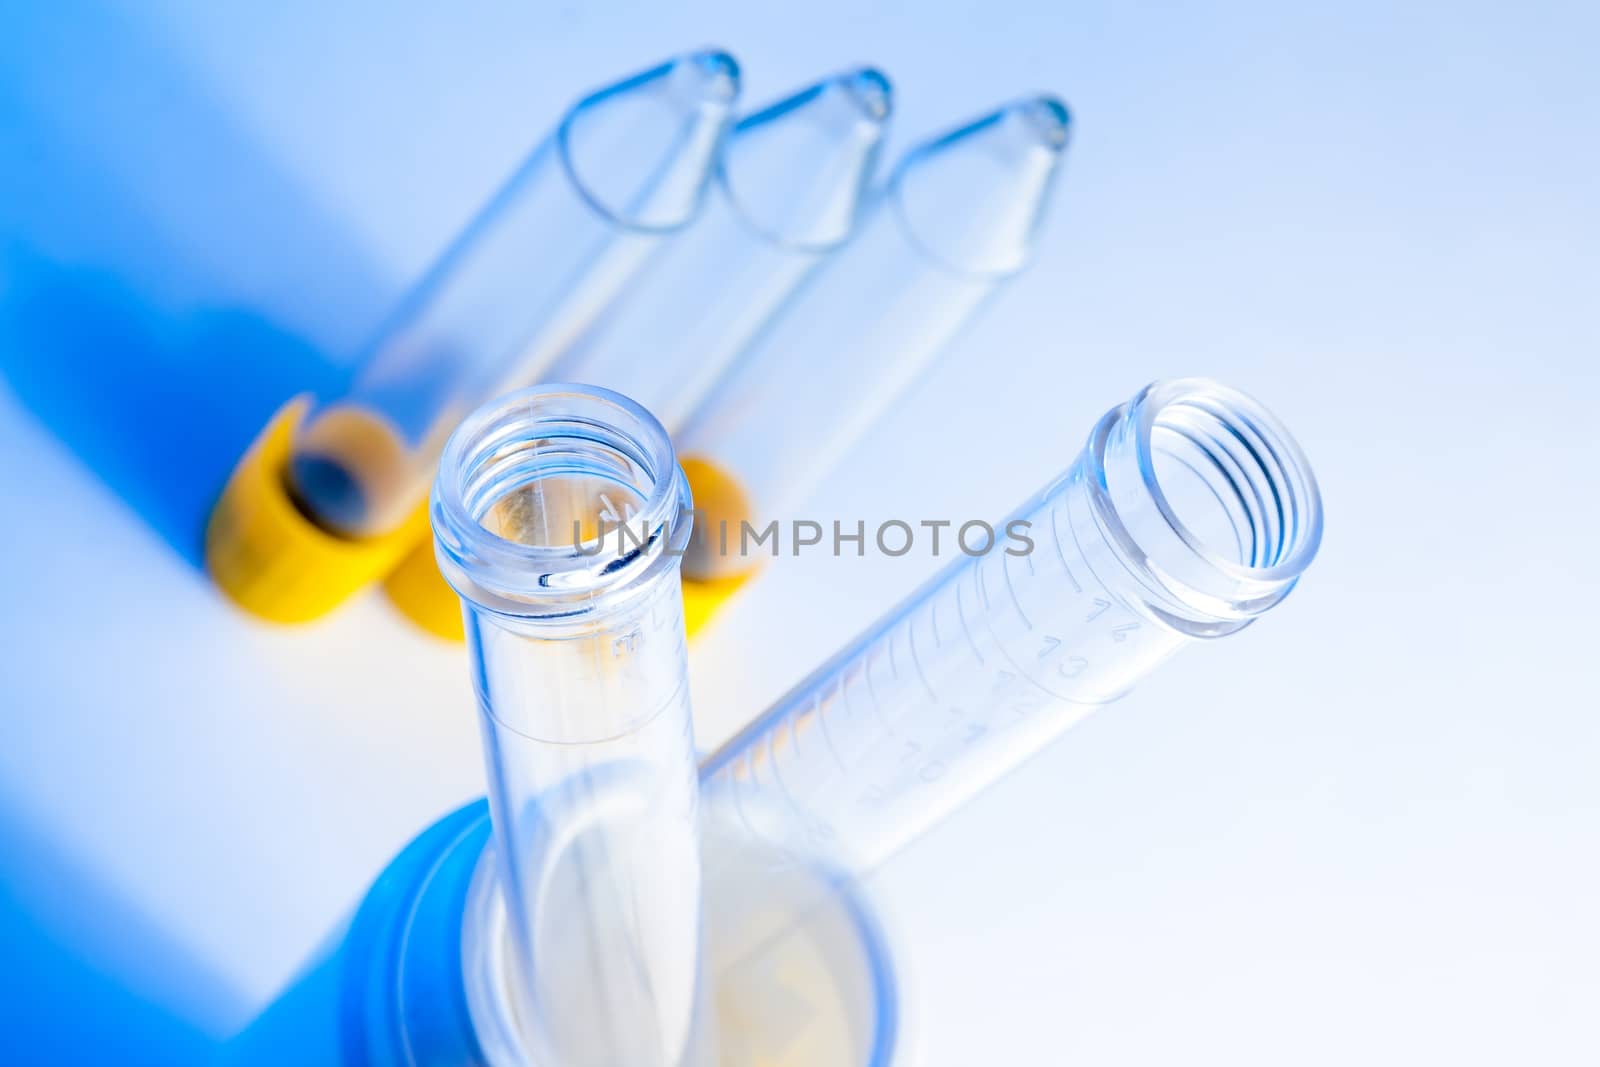 detail of the test tubes in laboratory on table by donfiore